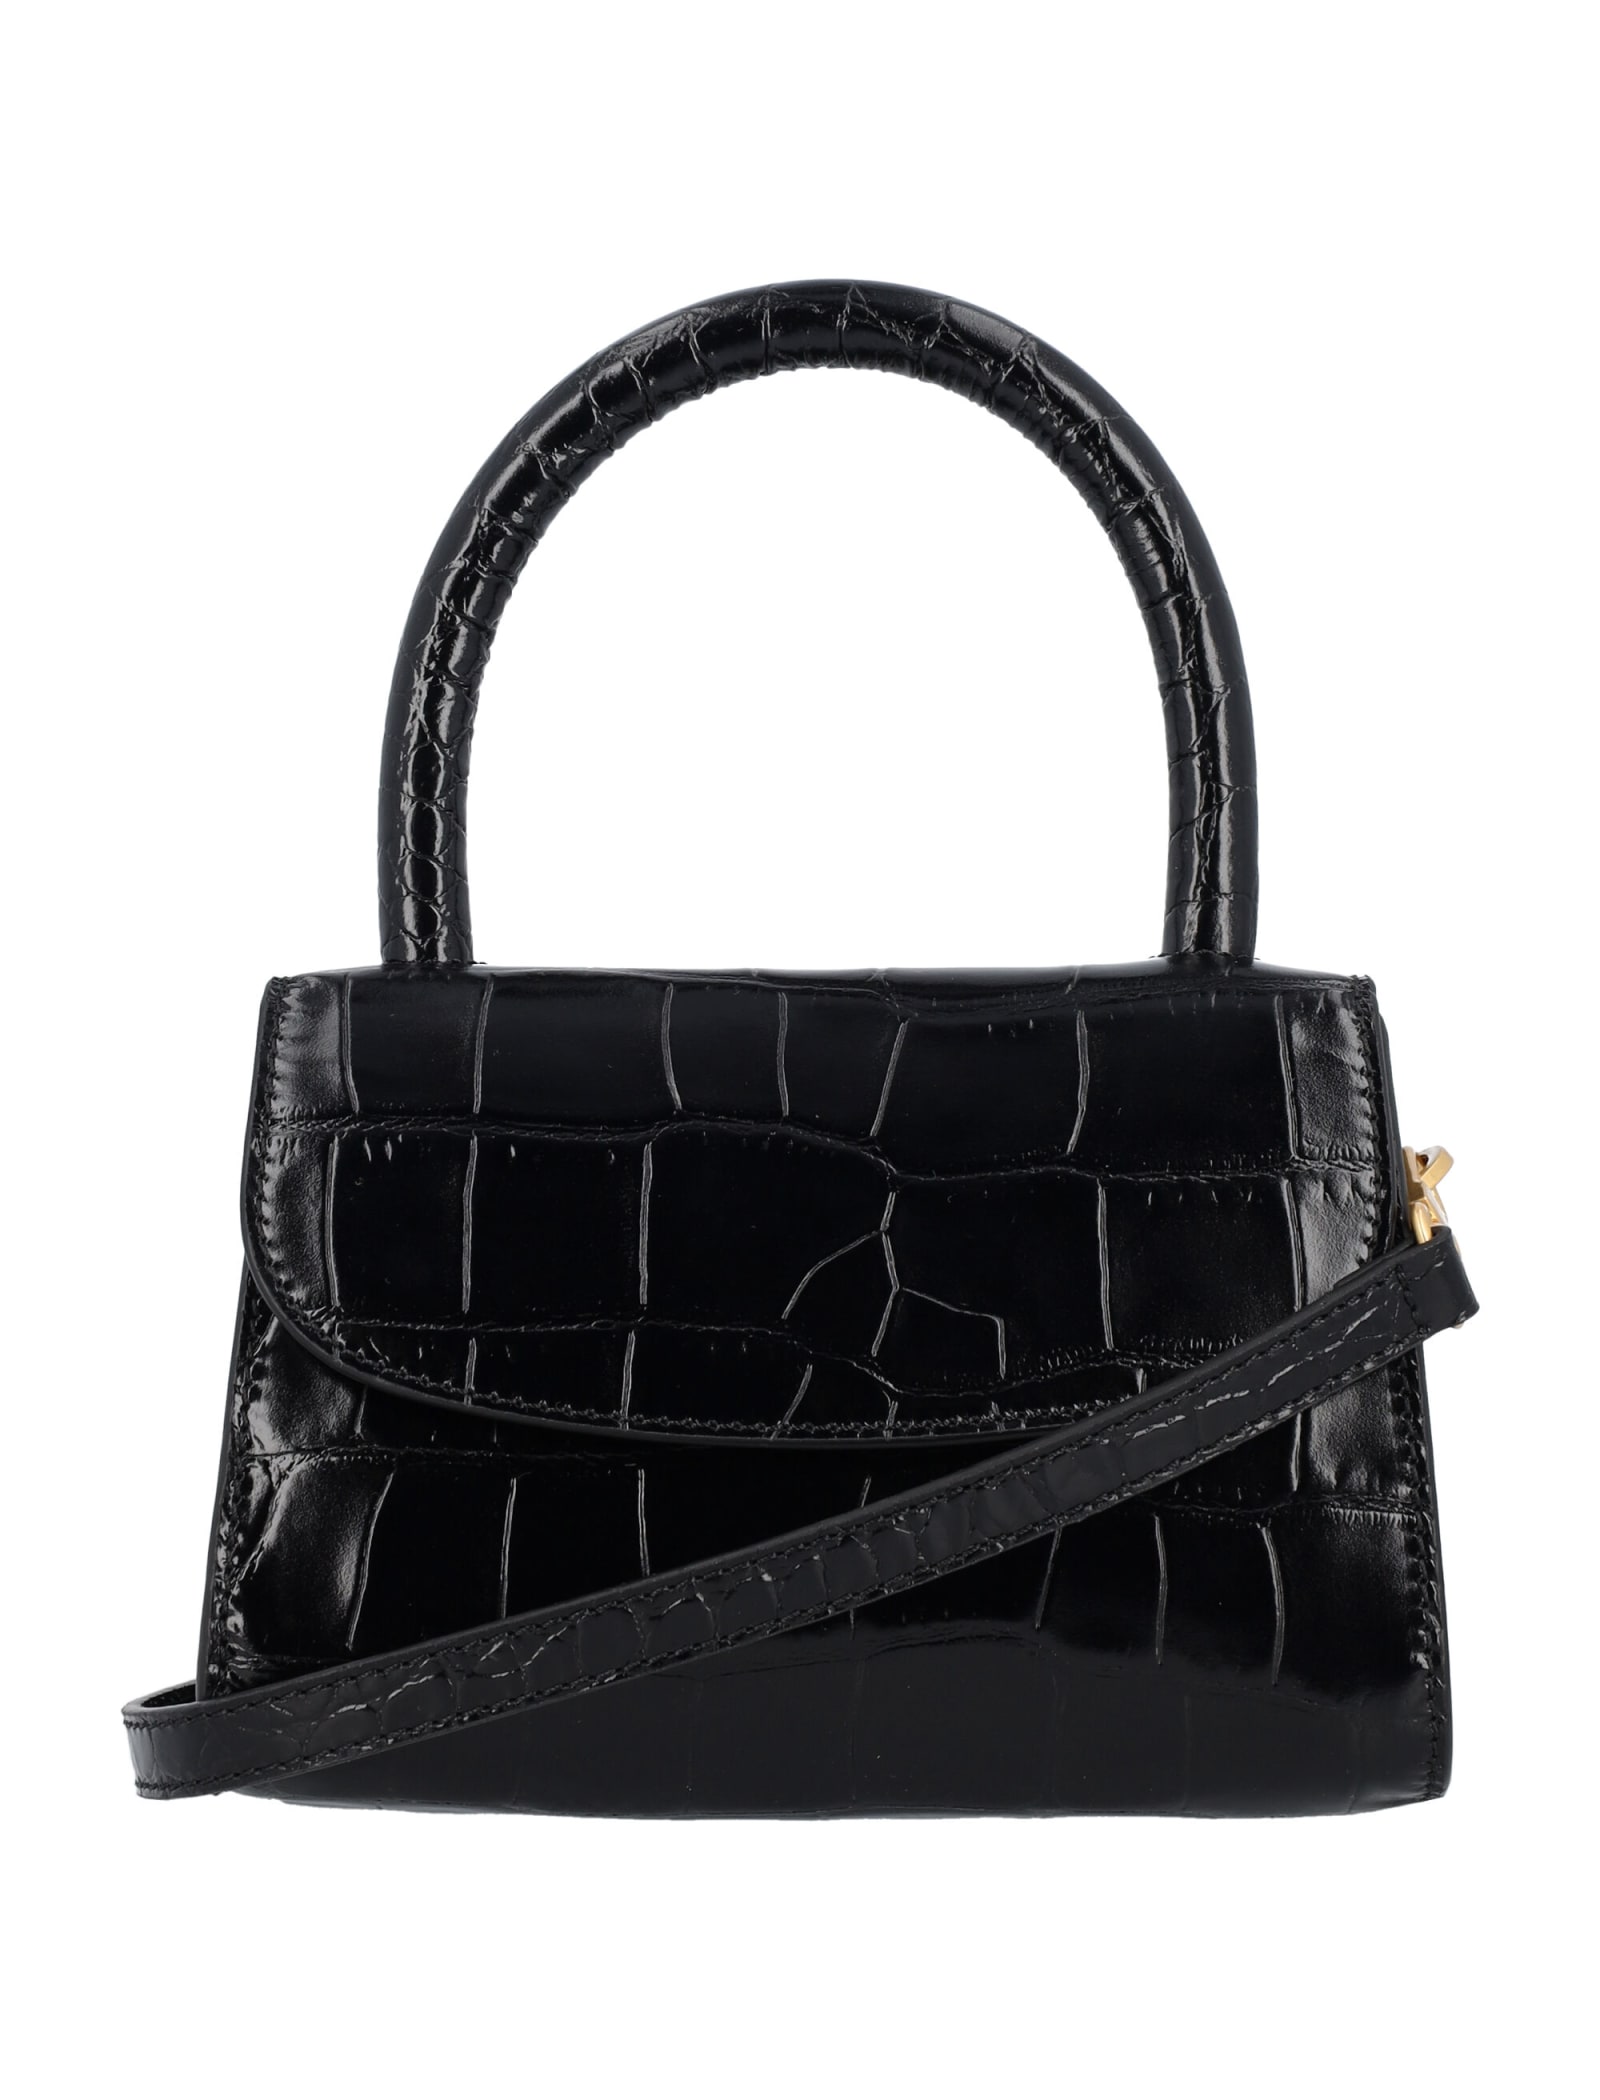 BY FAR Mini Croco Embossed Leather Bag